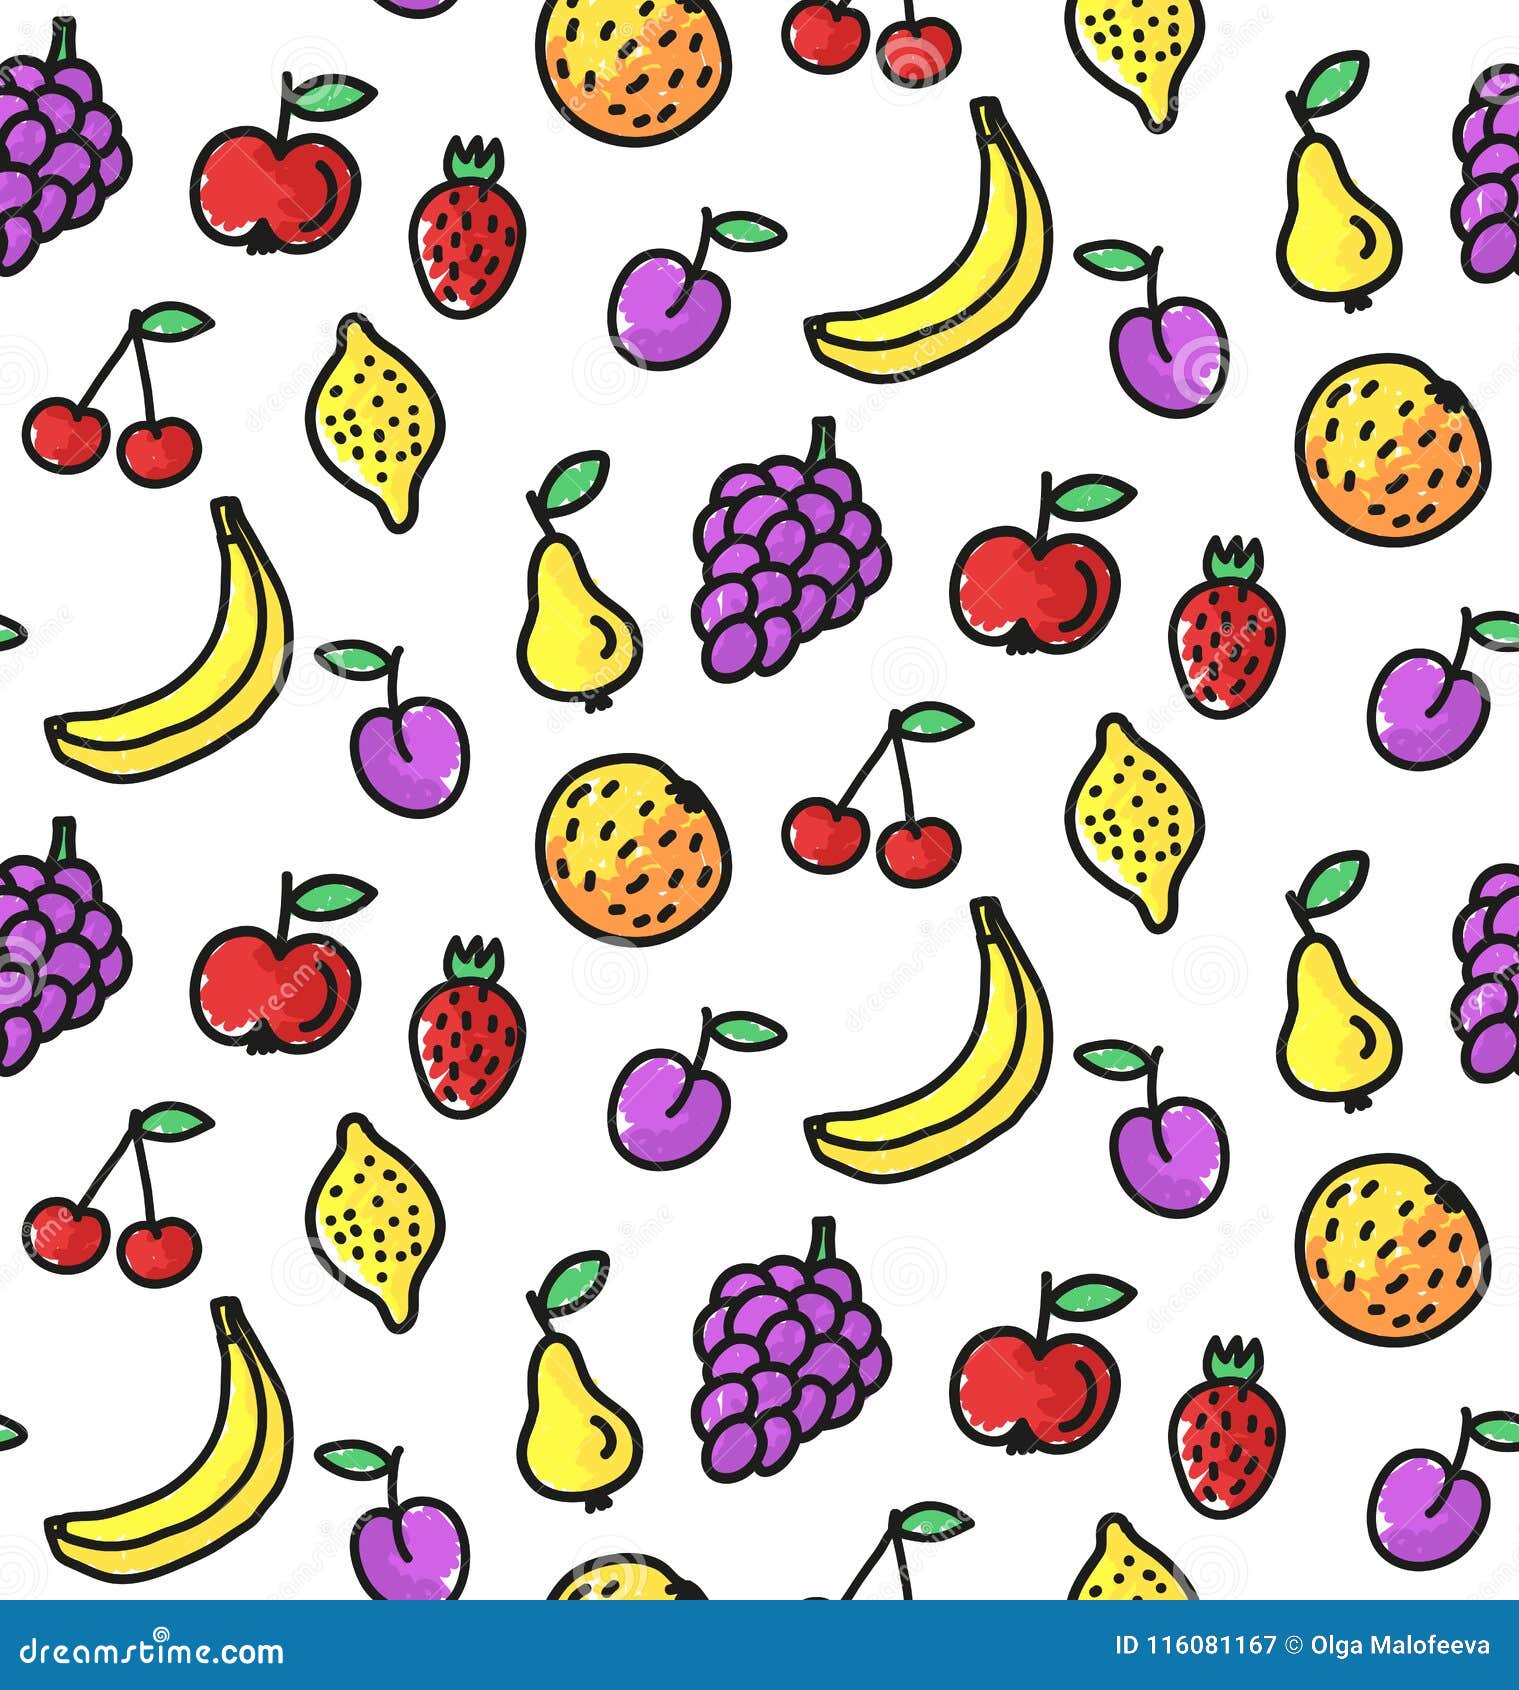 Fruits Simple Drawings Seamless Vector Pattern Stock Vector ...